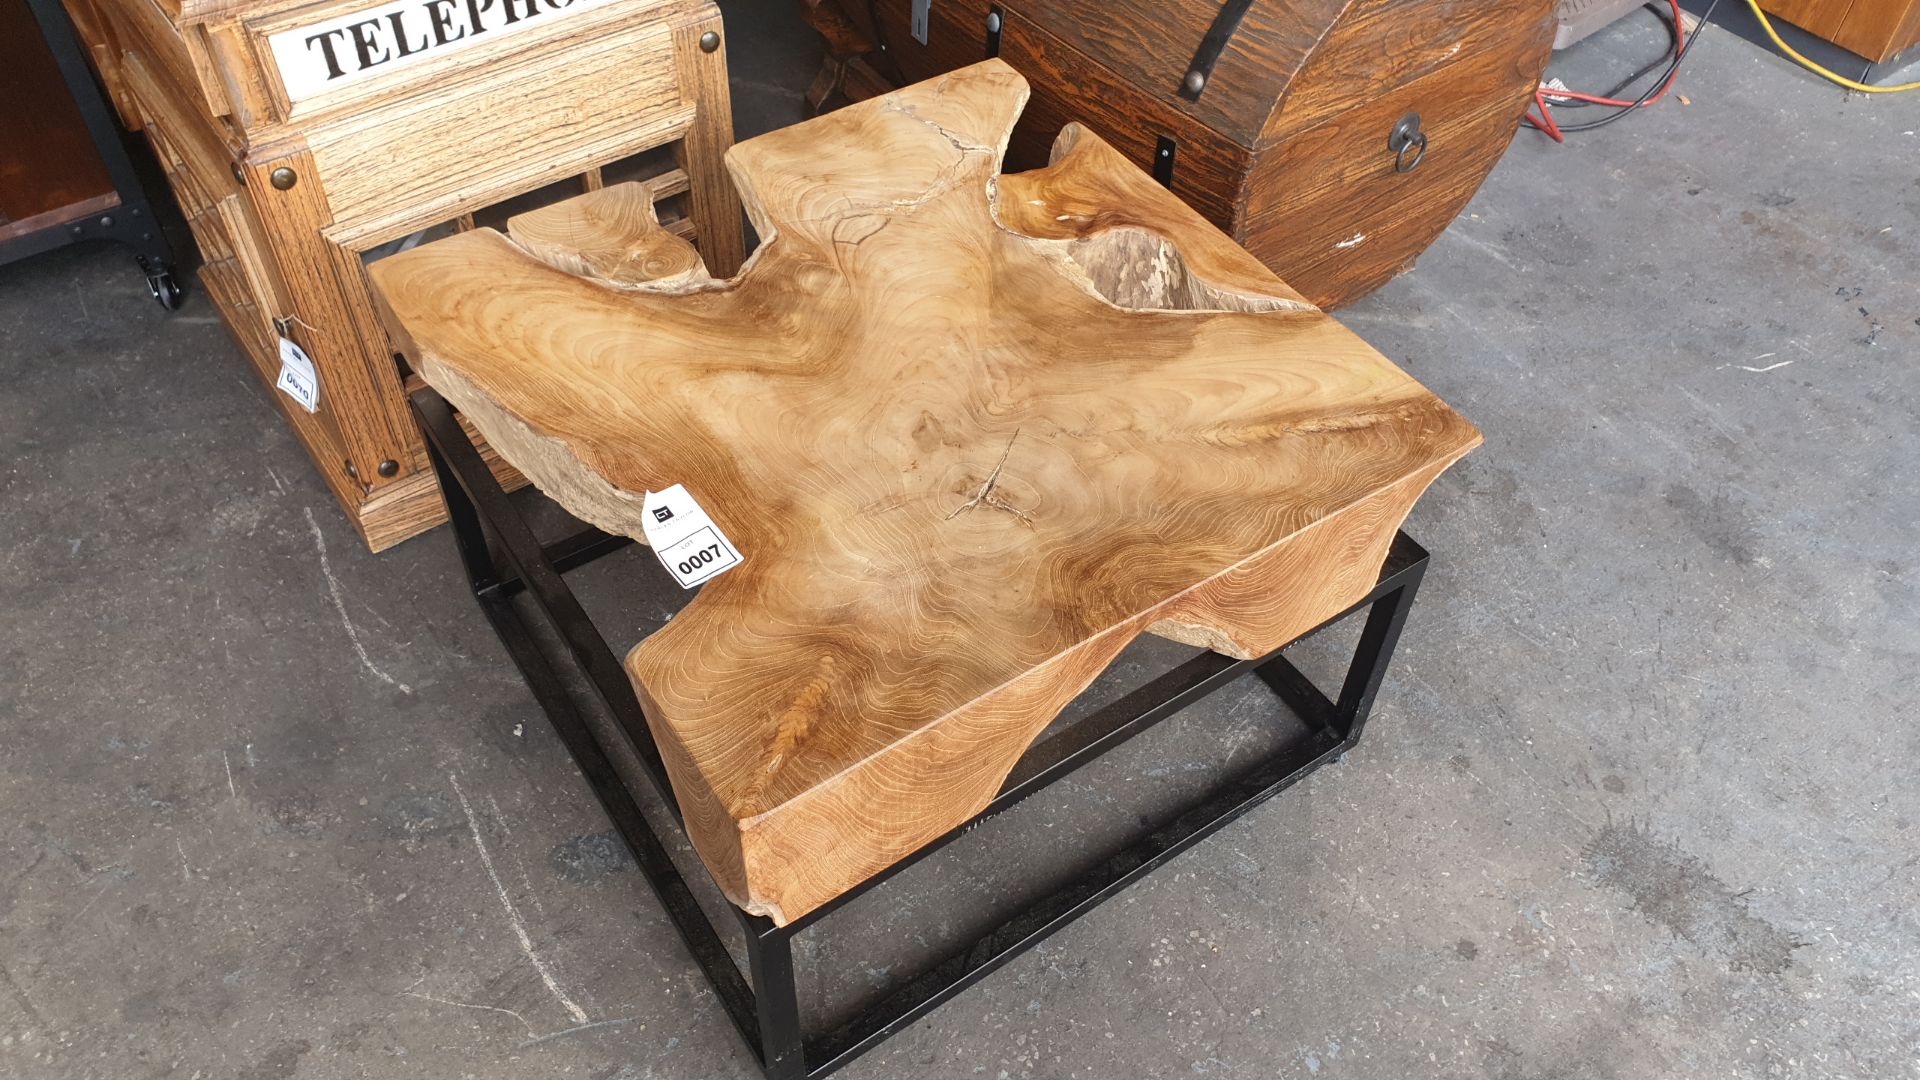 BRAND NEW SOLID TEAK ROOT WOODEN BLOCK COFFEE TABLE WITH BLACK IRON LEGS 70 X 70 X 40cm RRP £915 - Image 2 of 2